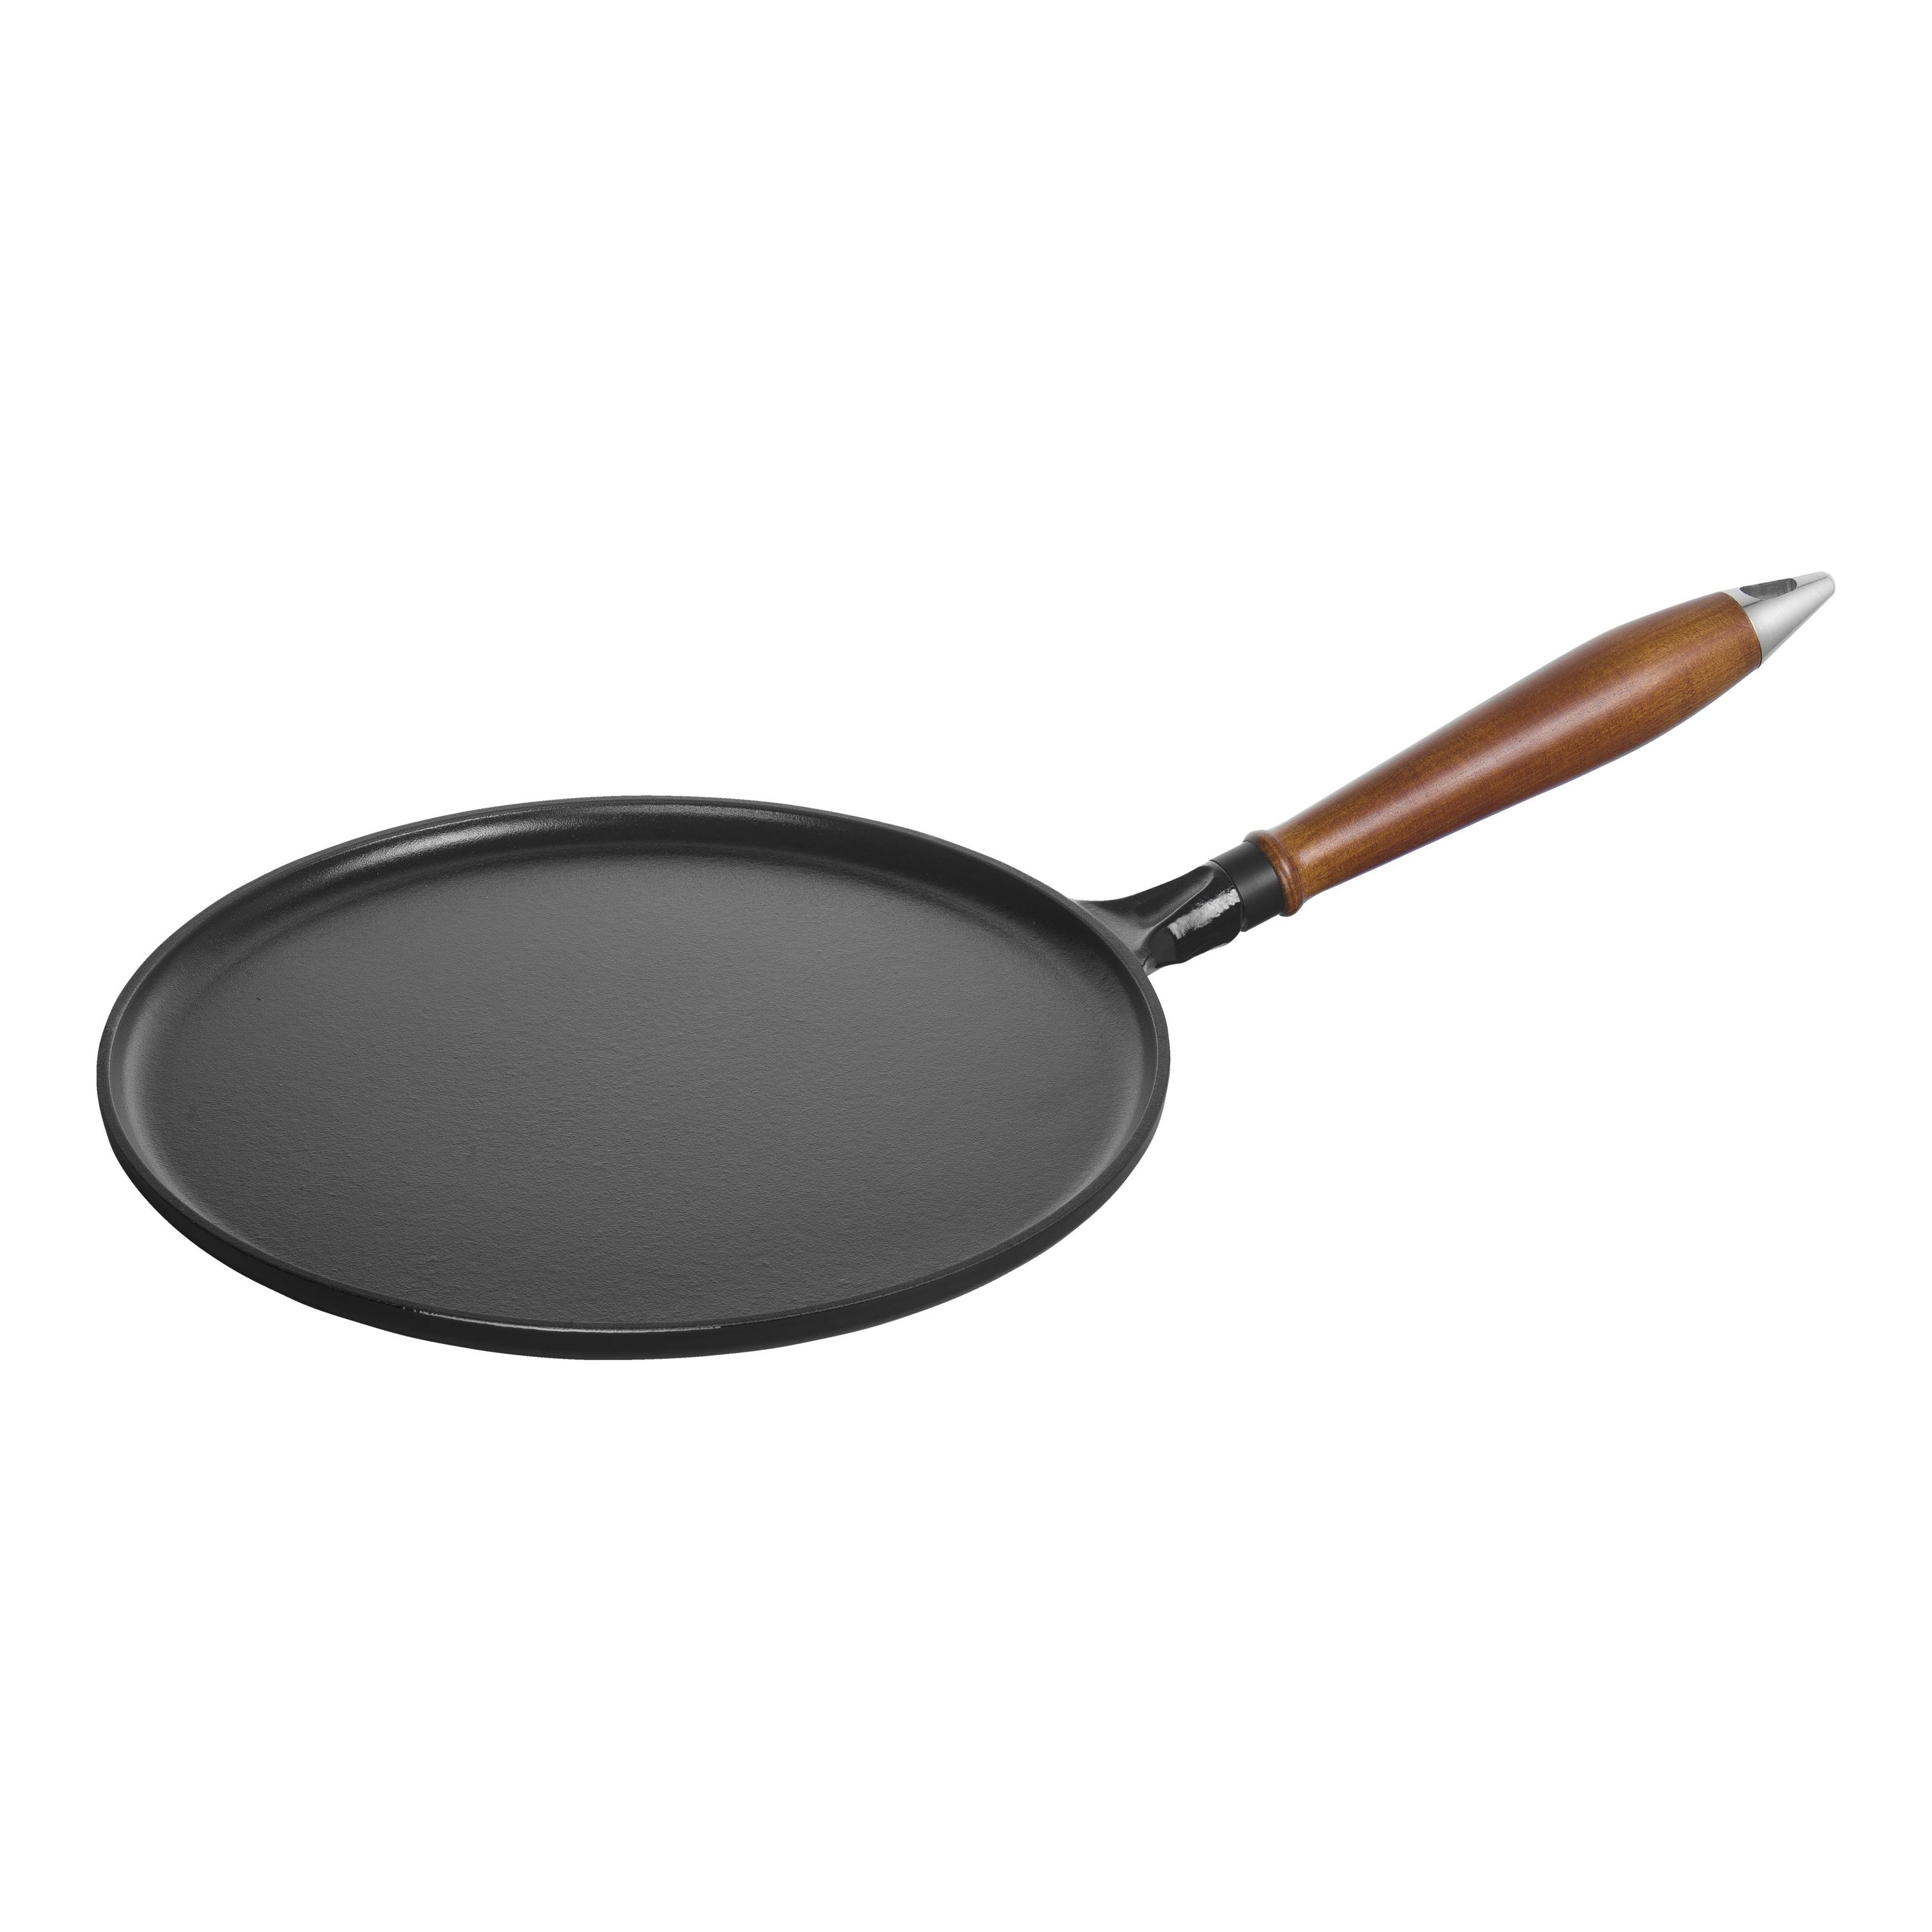 9.4" Non-Stick Crepe Pan Skillet with Stay Cool Soft Handle Made in Ukraine BIOL 